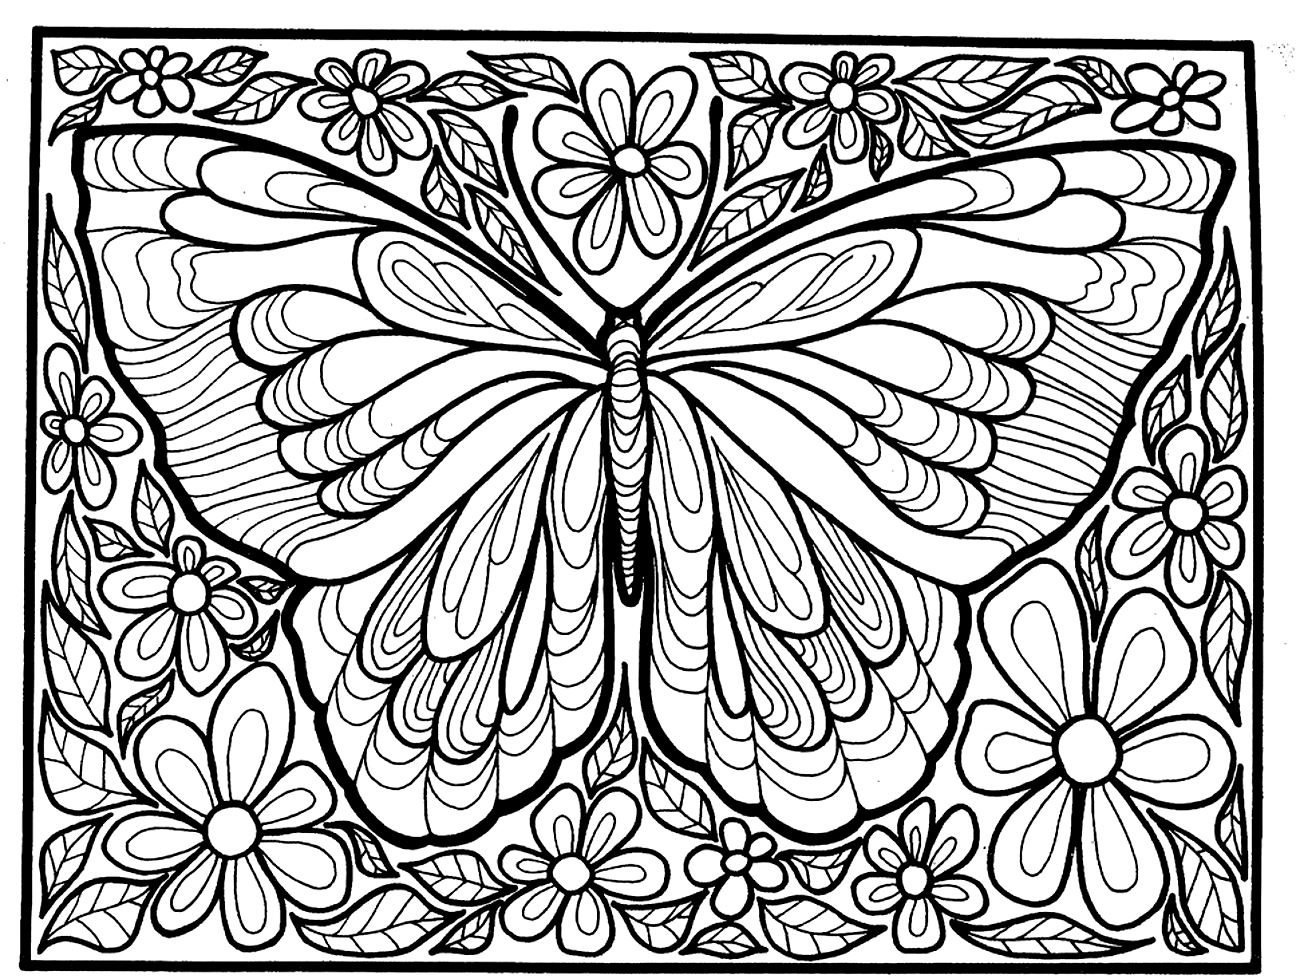 Download Big butterfly - Butterflies & insects Adult Coloring Pages